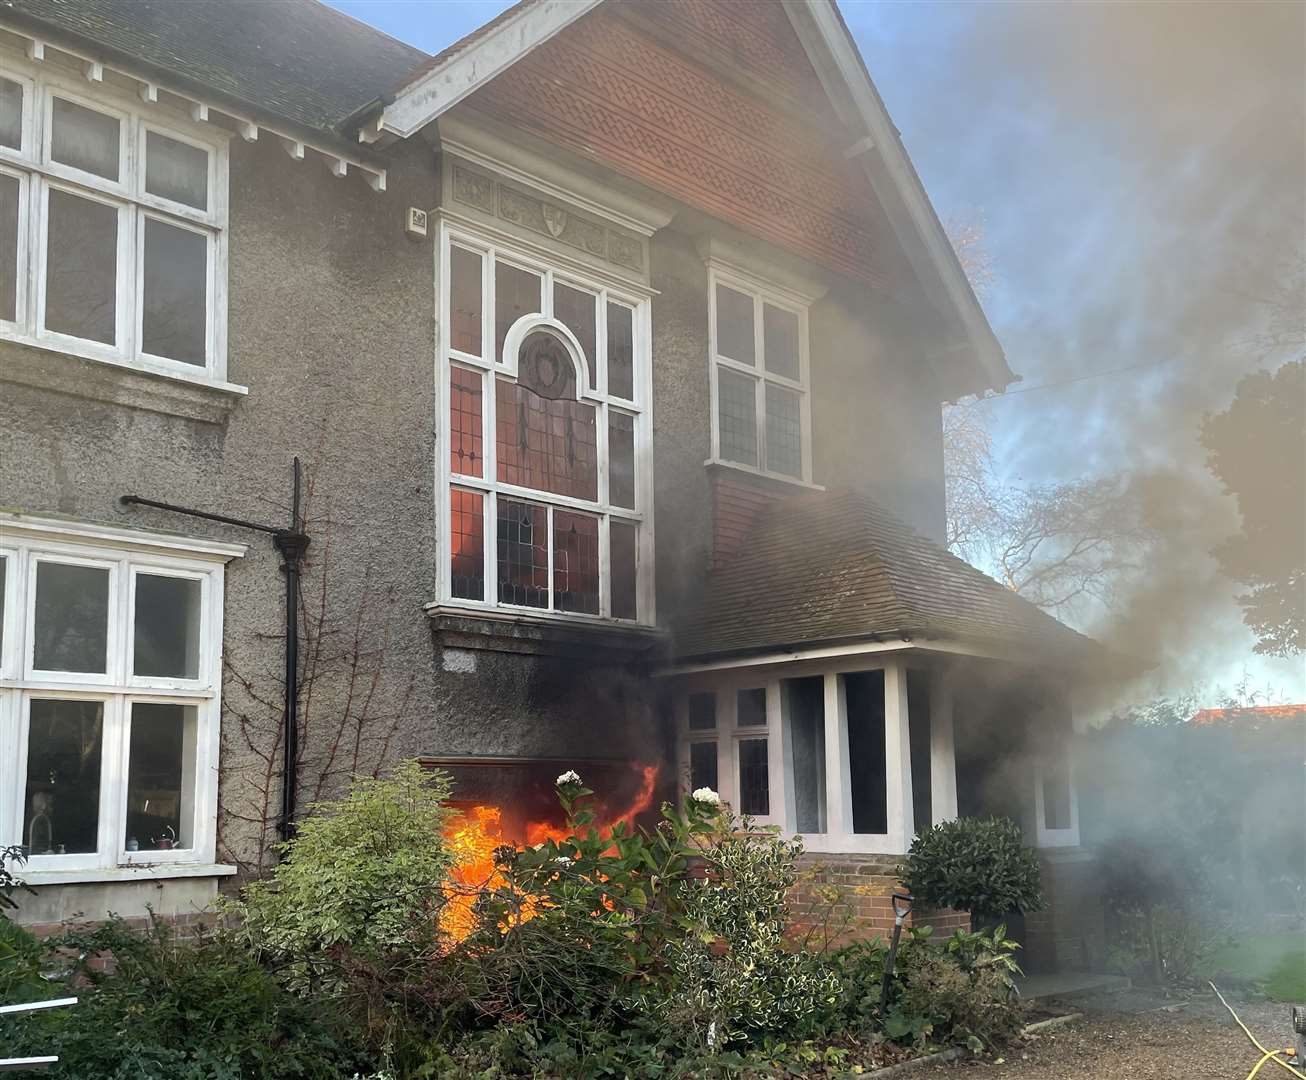 The family home in Saltwood was destroyed in a fire last Wednesday. All pictures courtesy of the Sercombe family and Charlotte Barcham